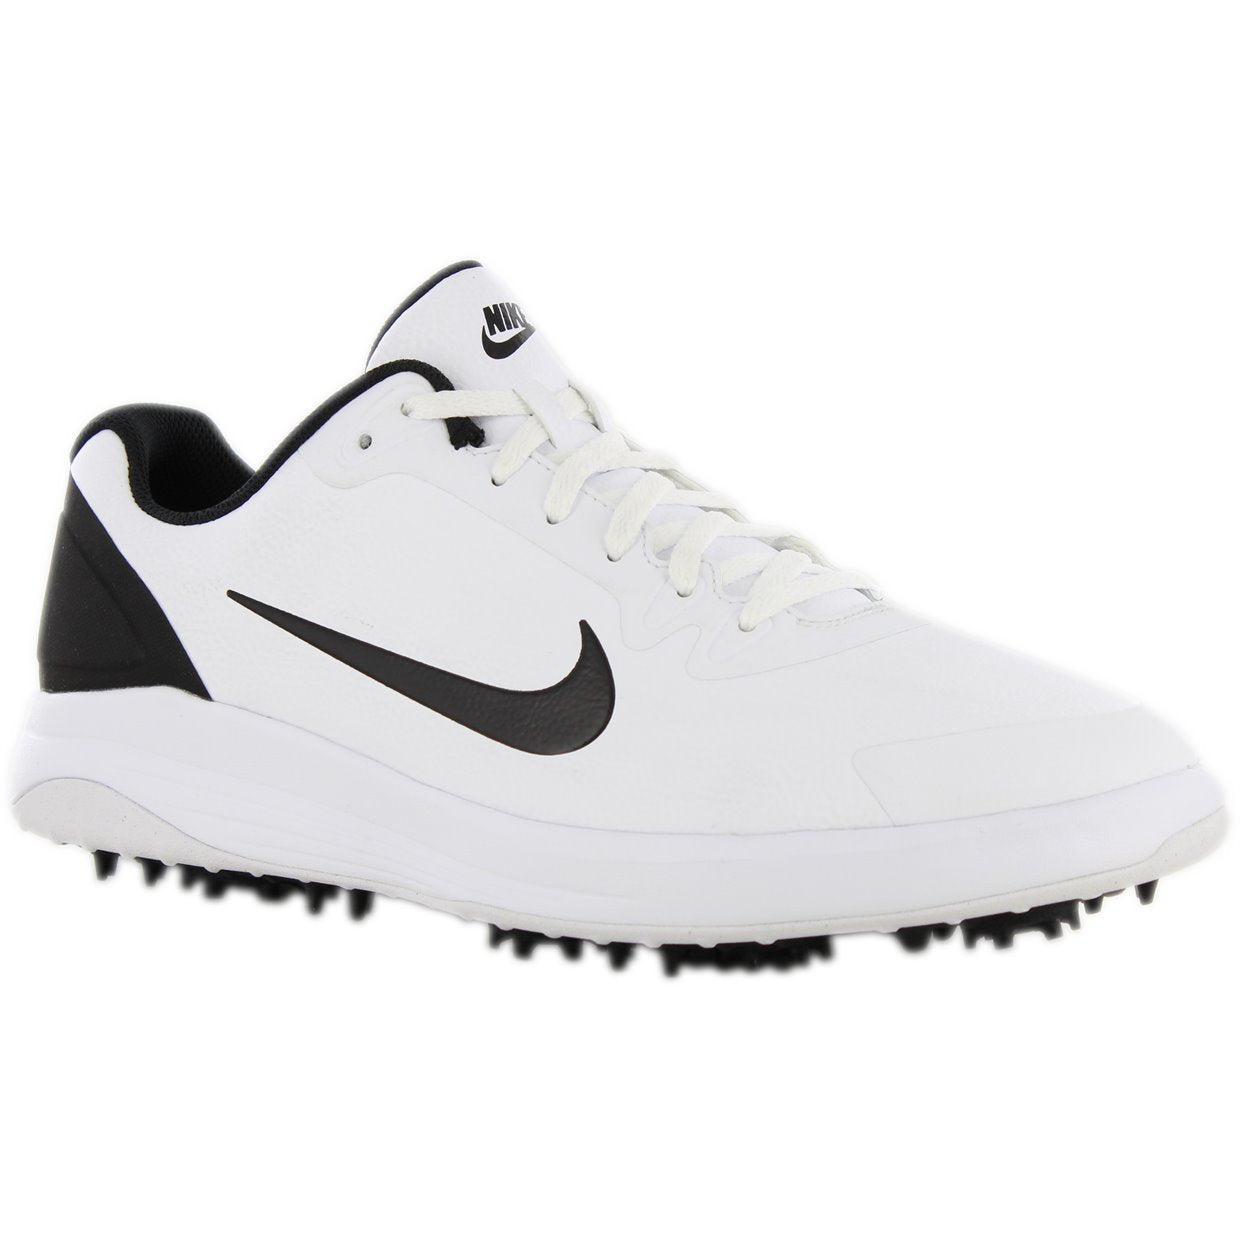 Here are the best Nike golf deals on Black Friday